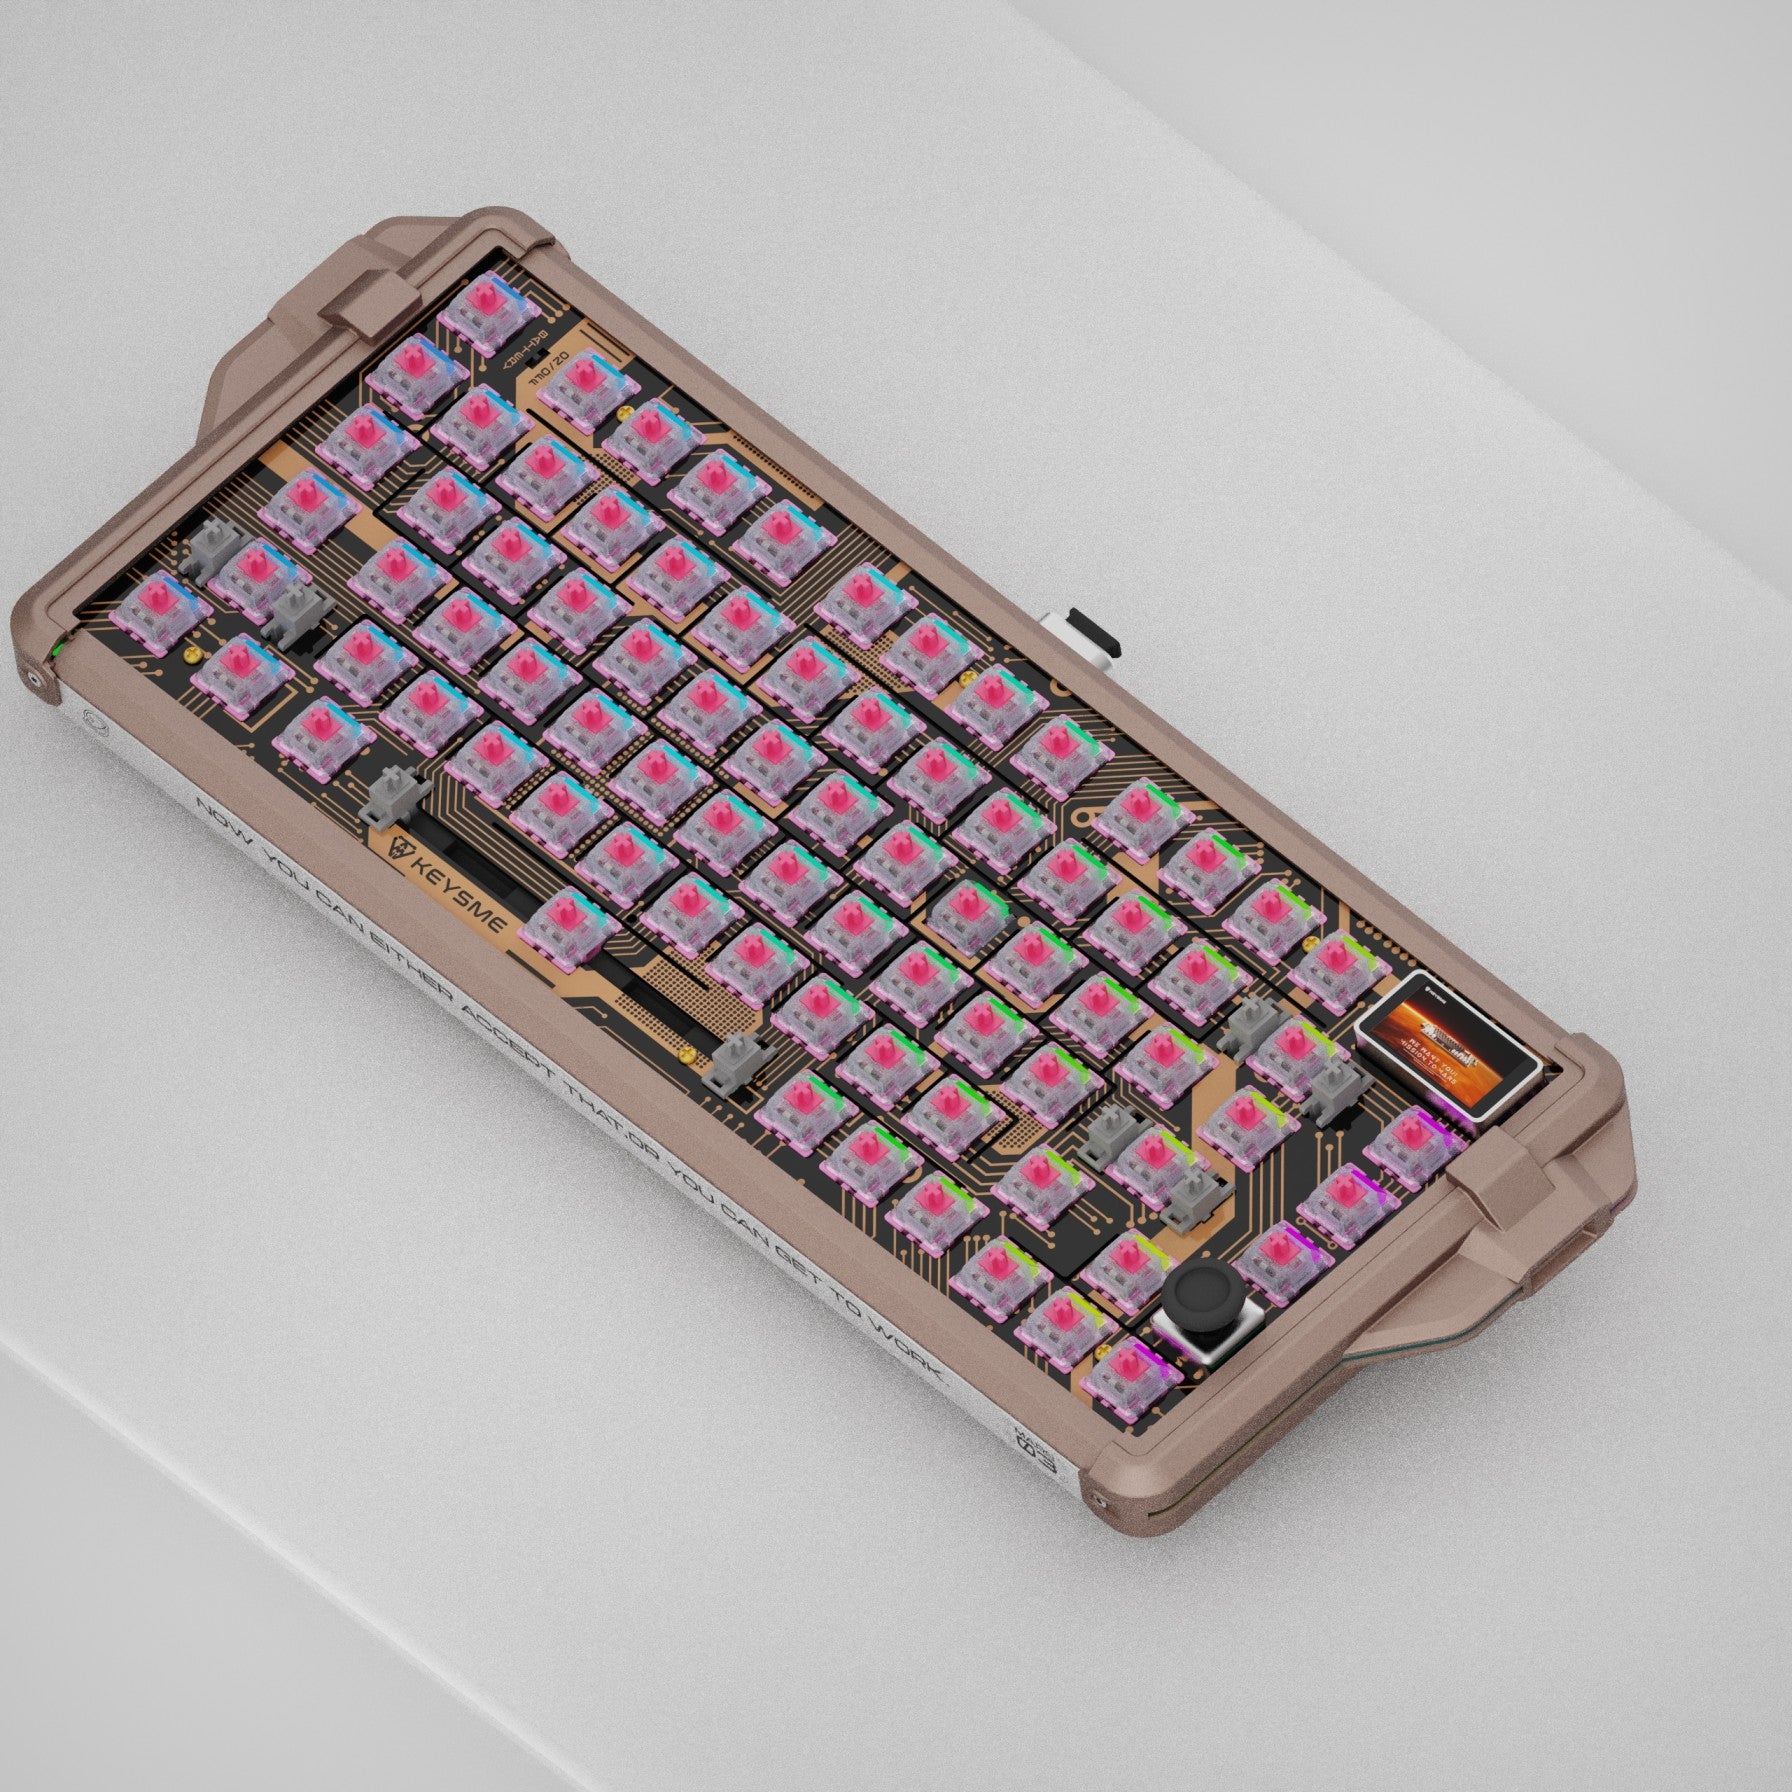 KeysMe Mars 03 spaceship mechanical keyboard hot-swappable Gateron Weightlessness switch for Windows Mac Mars Sand color